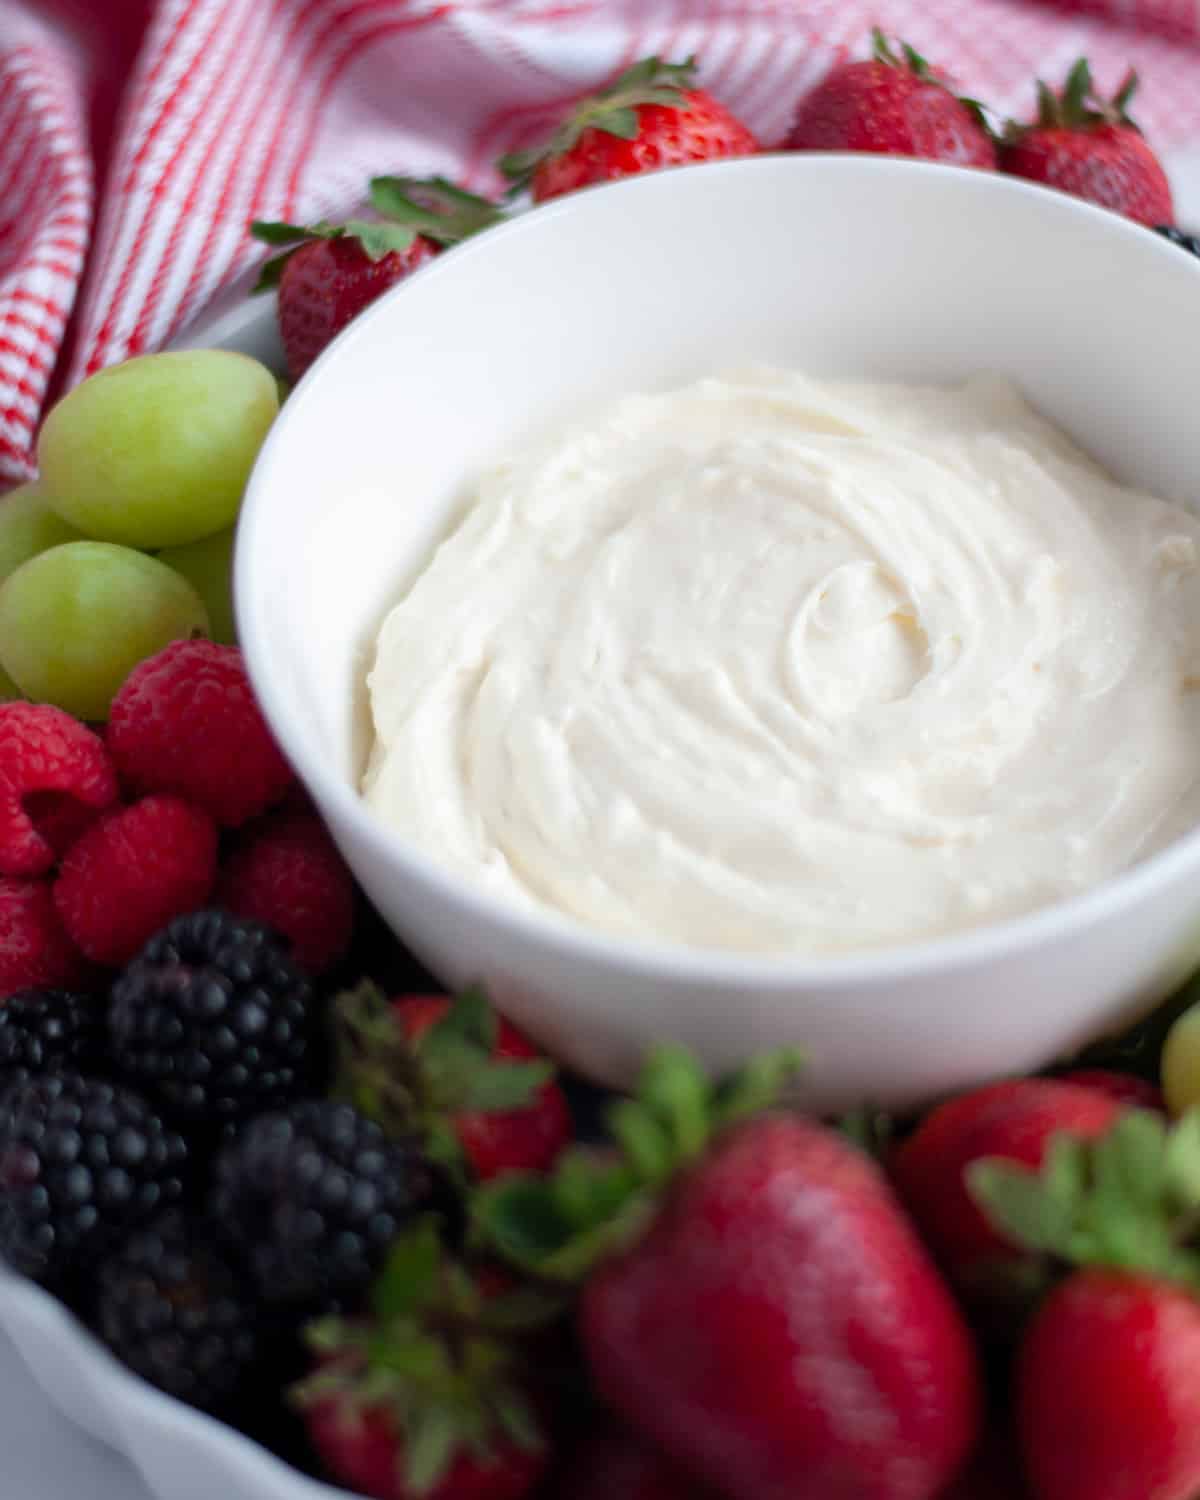 2 ingredient fruit dip in a white bowl, in the middle of a tray full of fresh fruit. The tray has green grapes, strawberries, blackberries, and raspberries.